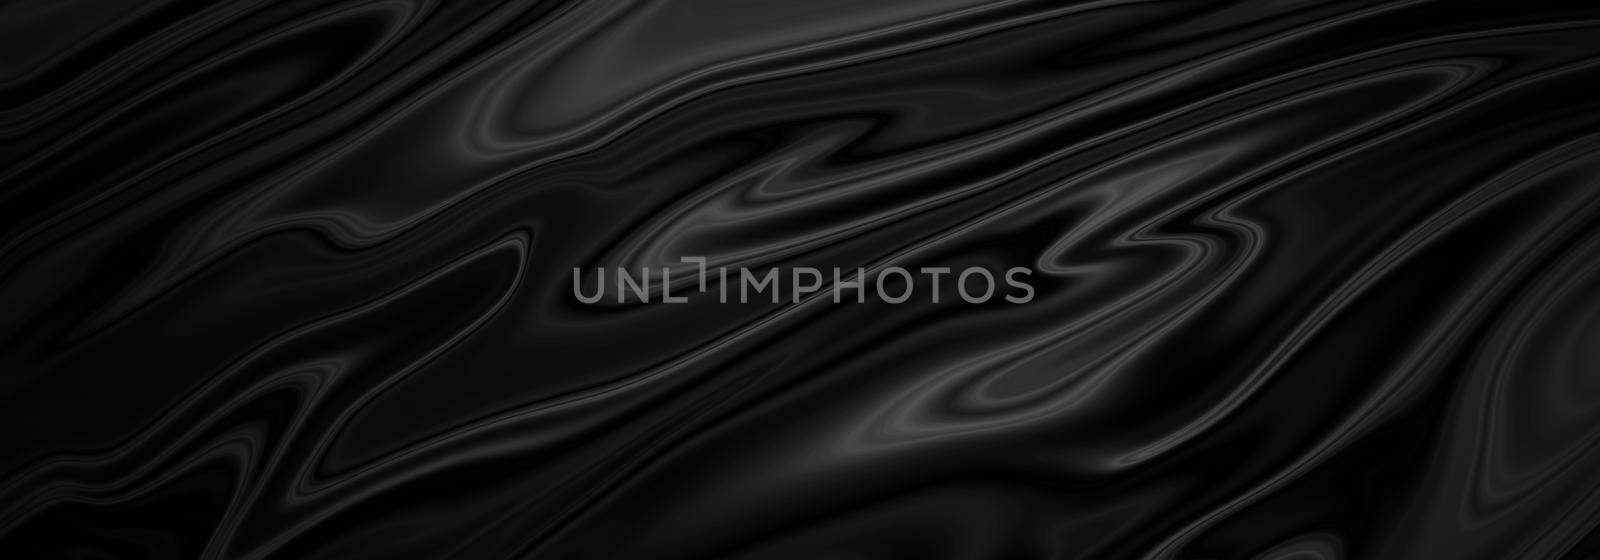 Black abstract fluid background with copy space